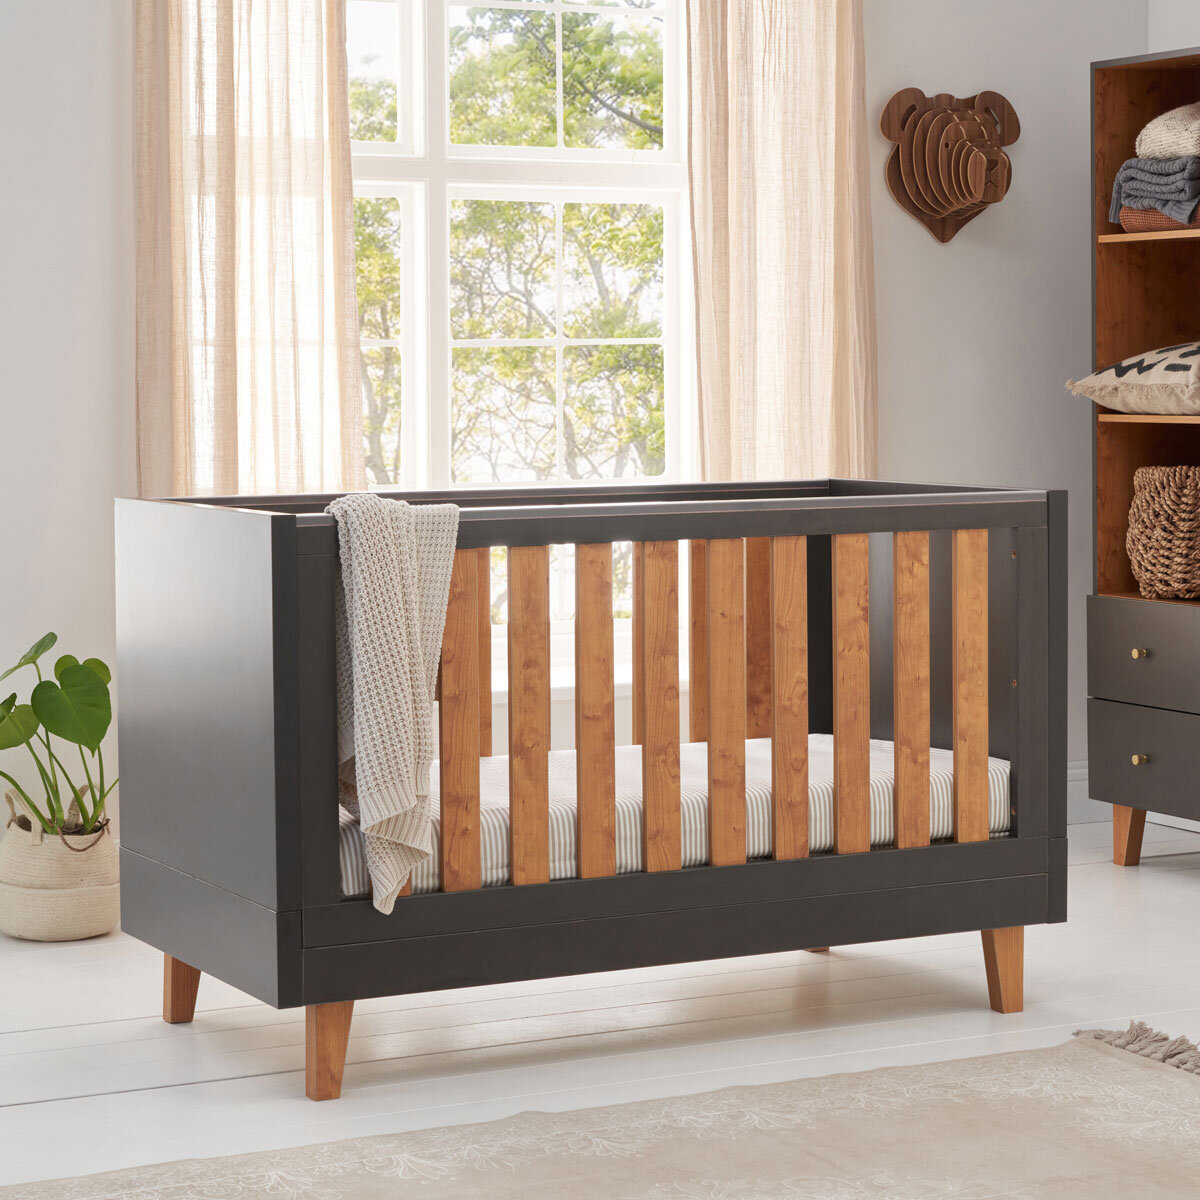 Tutti Bambini Como Cot with Sprung Mattress, Slate Grey and Rosewood